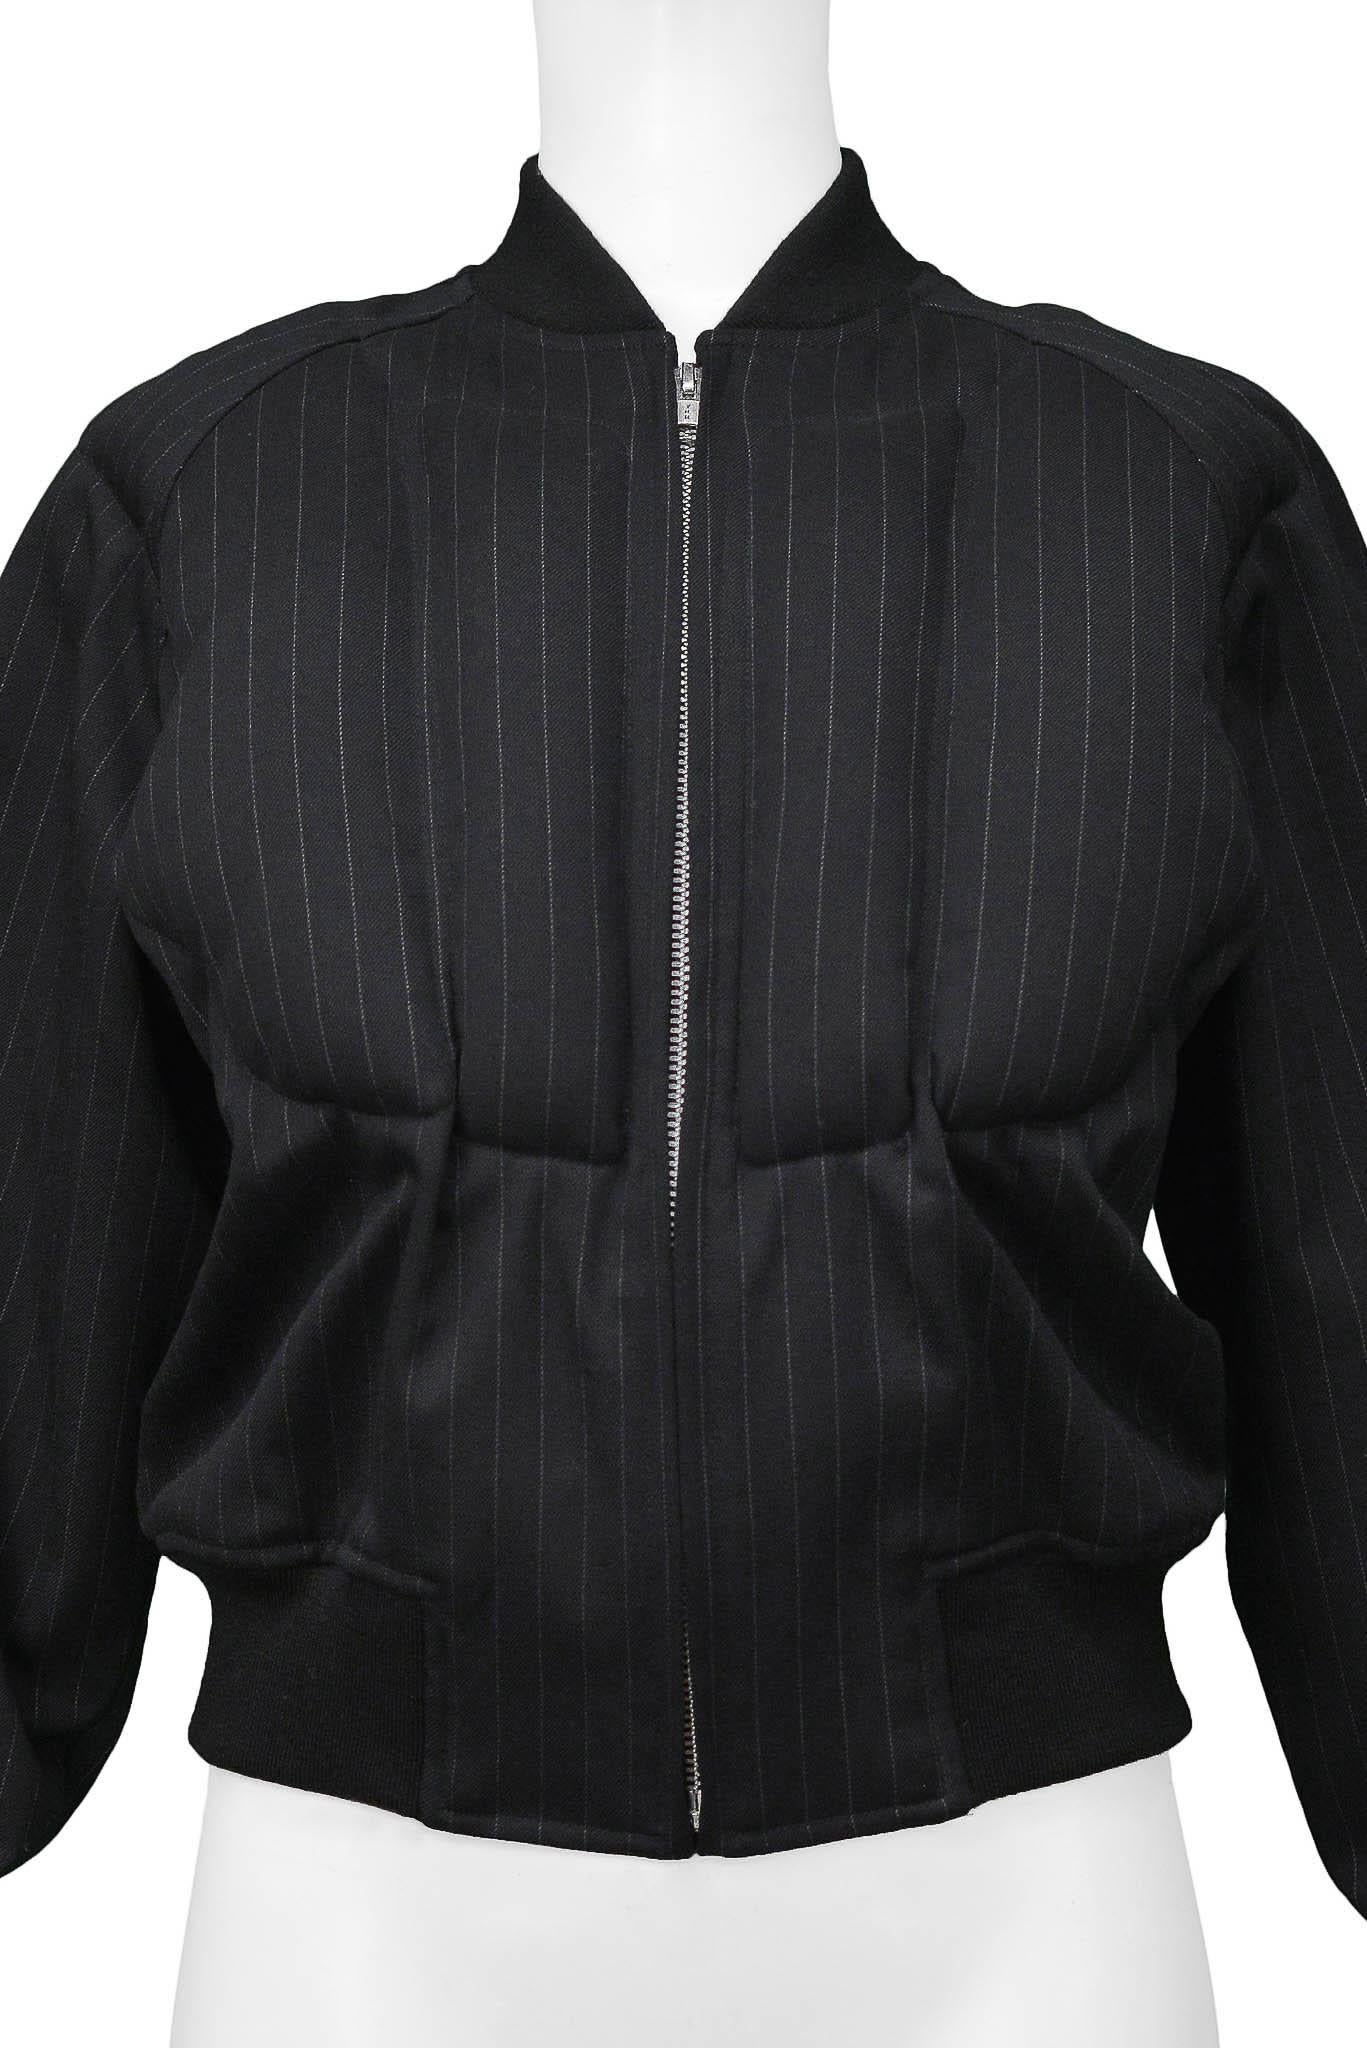 Comme Des Garcons Black Padded Pinstripe Jacket 2010 In Excellent Condition For Sale In Los Angeles, CA